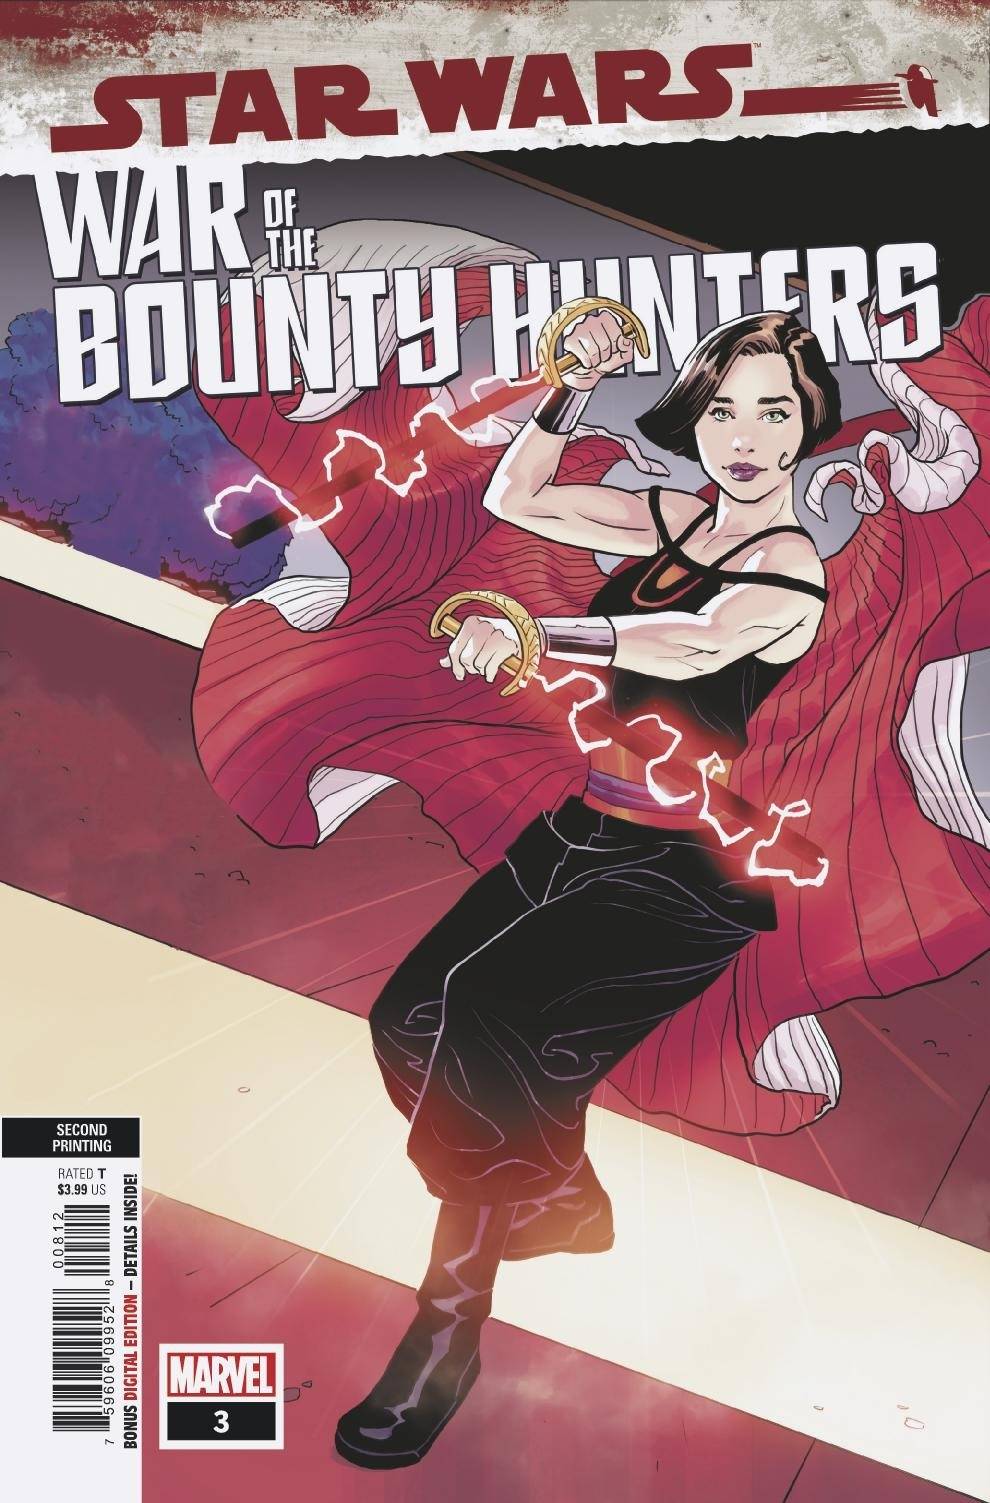 War of the Bounty Hunters #3 (2nd Printing) (29.09.2021)